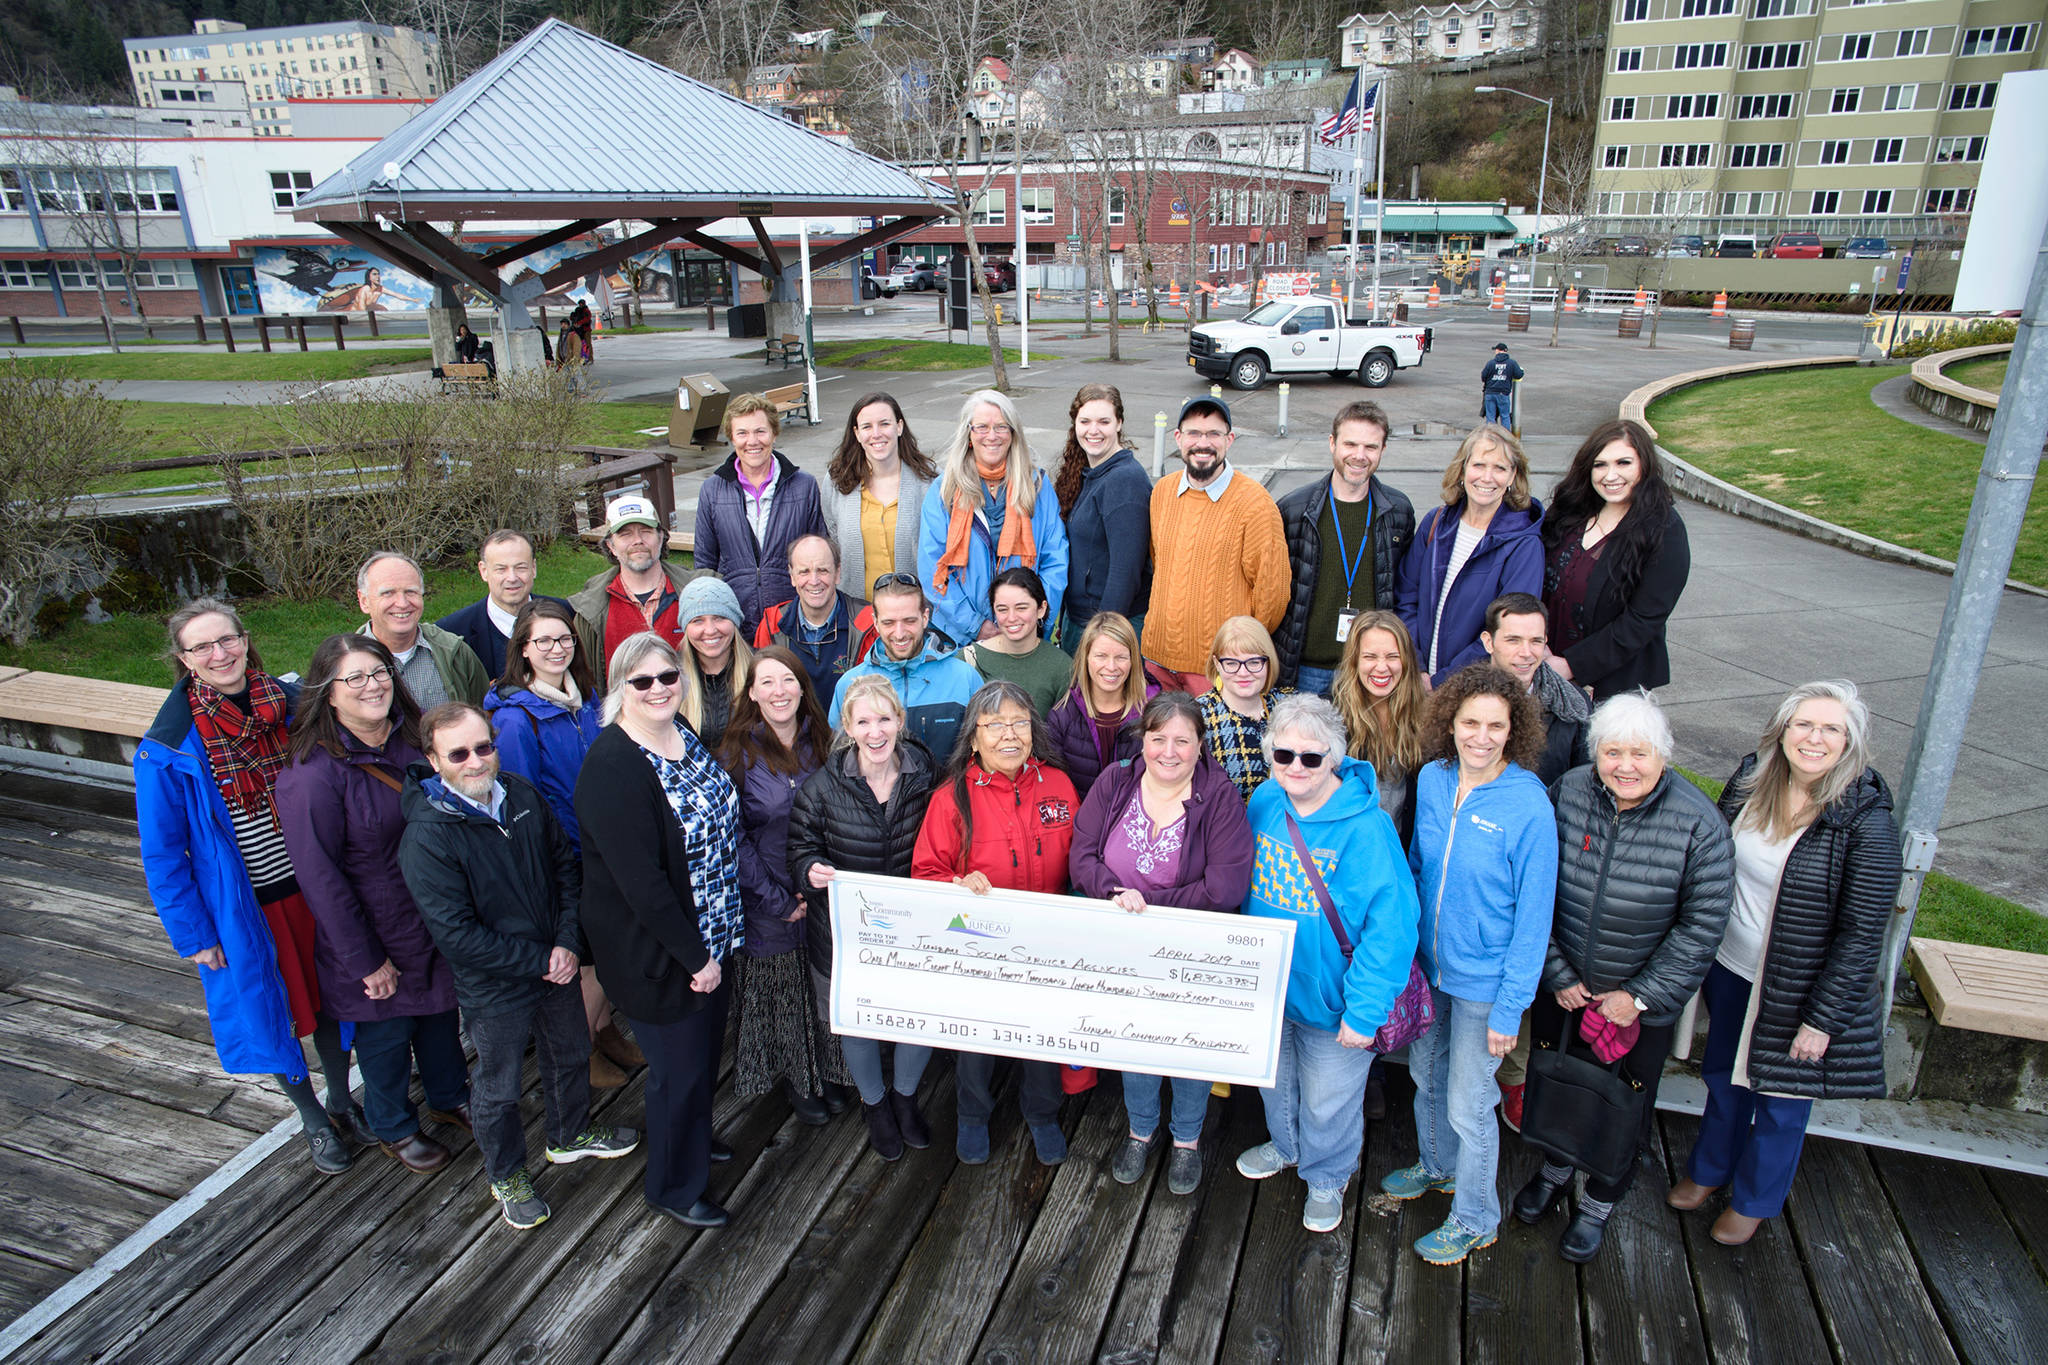 Recipients of the 2019 Hope Endowment grants from the Juneau Community Foundation pose for a photo at Marine Park in Juneau. (Courtesy Photo | Juneau Community Foundation)